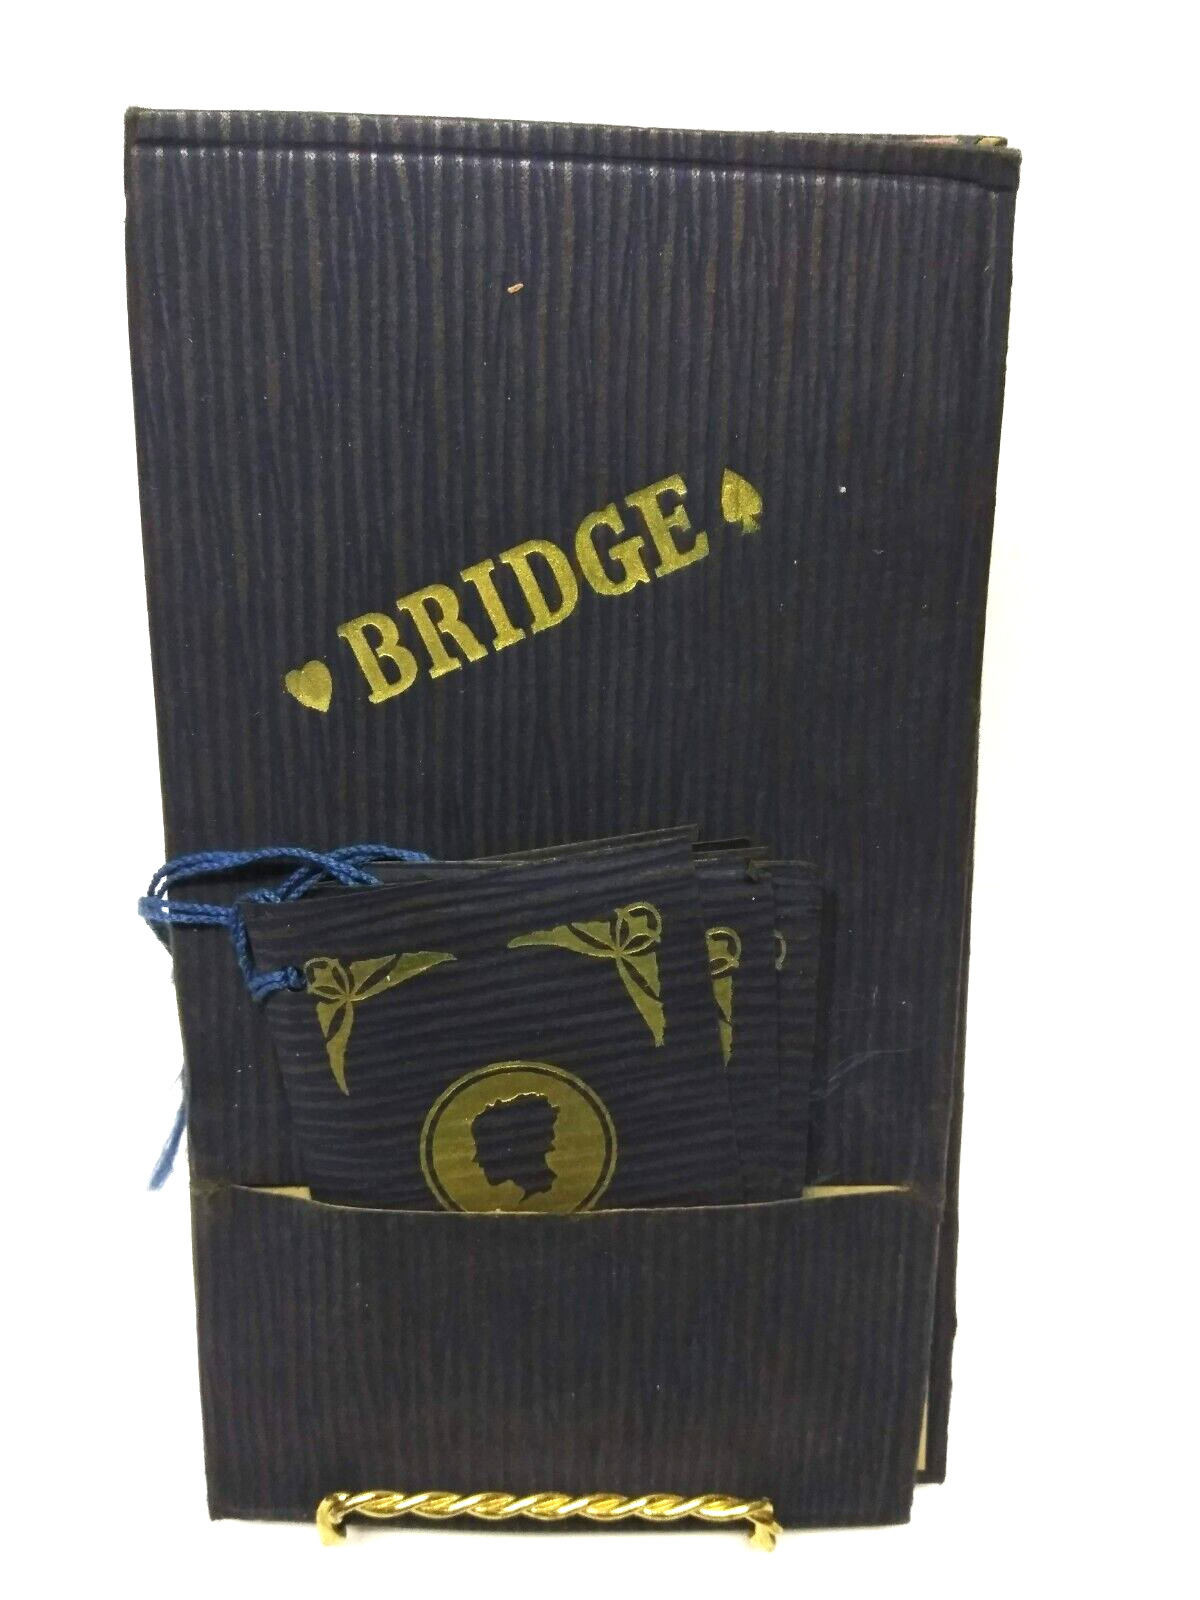 Vintage 1930s Art Deco Bridge Tally Set With Printed Rules & 4 Tally Cards (new)